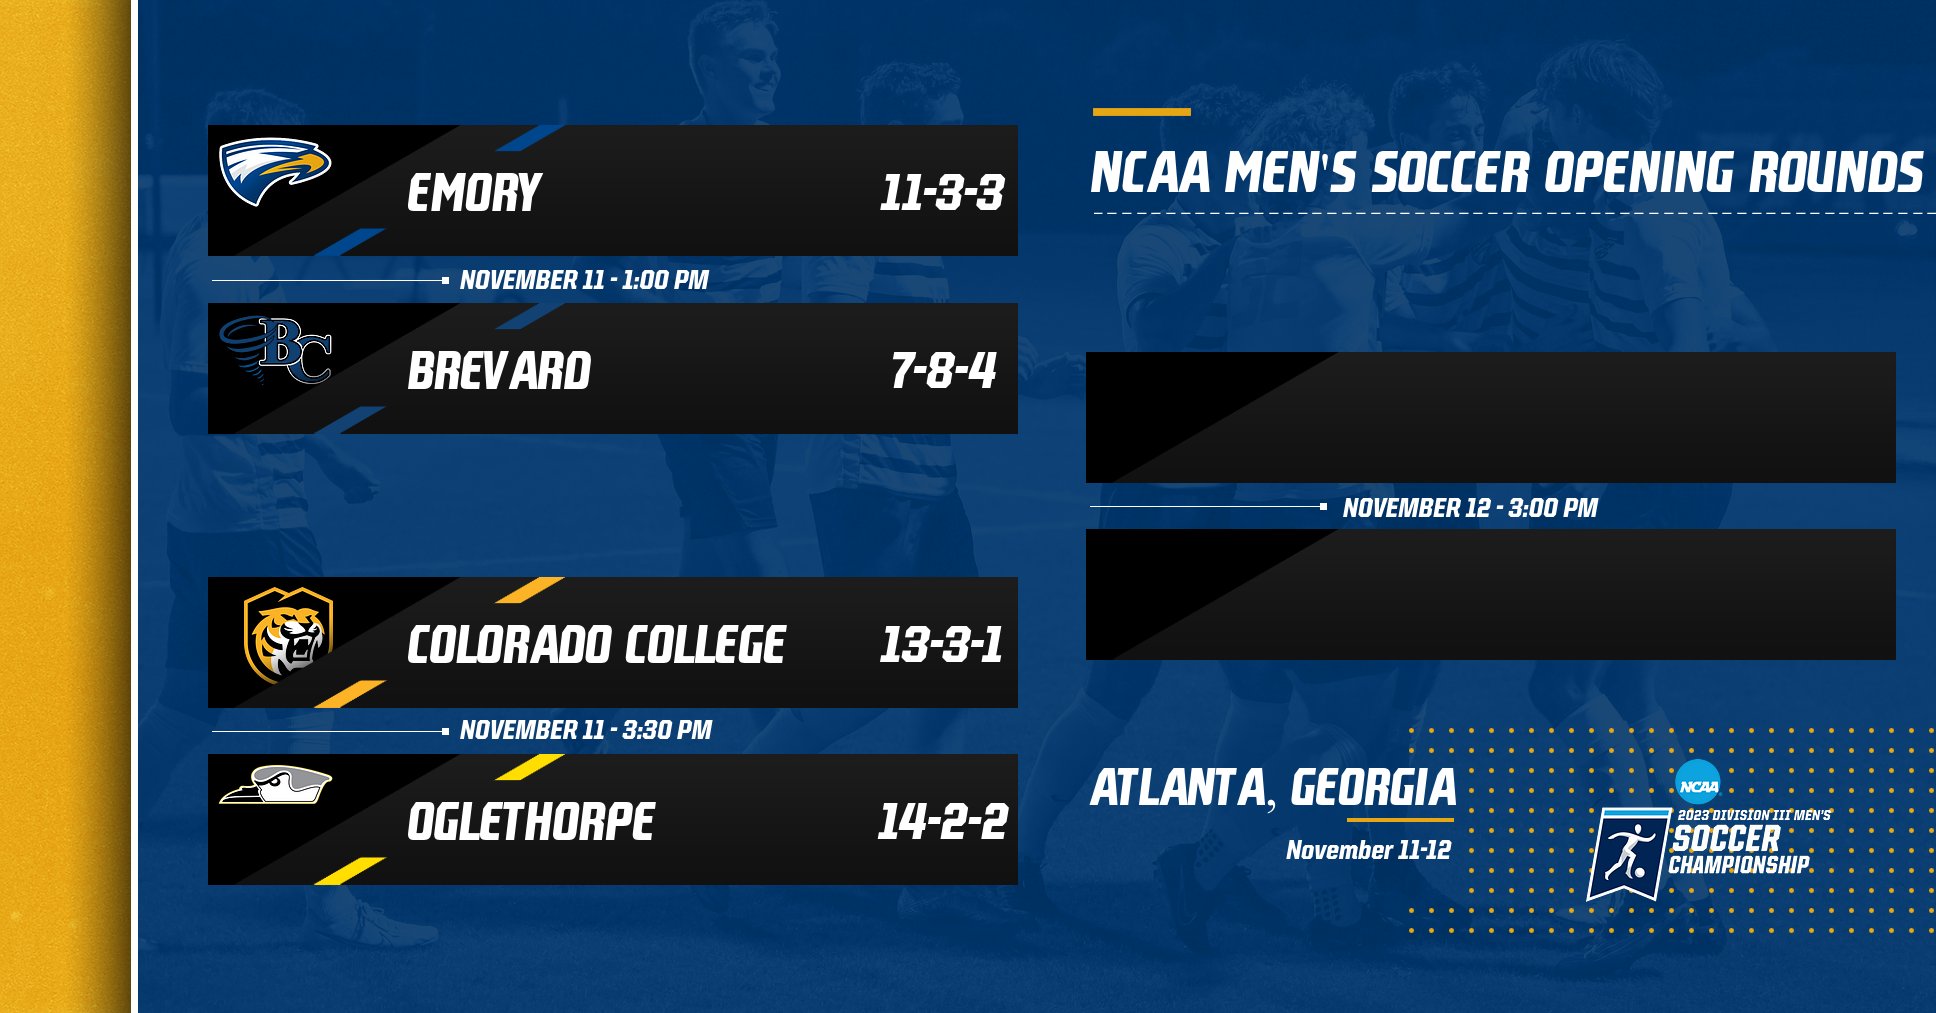 Men's Soccer Selected to Host NCAA First & Second Rounds